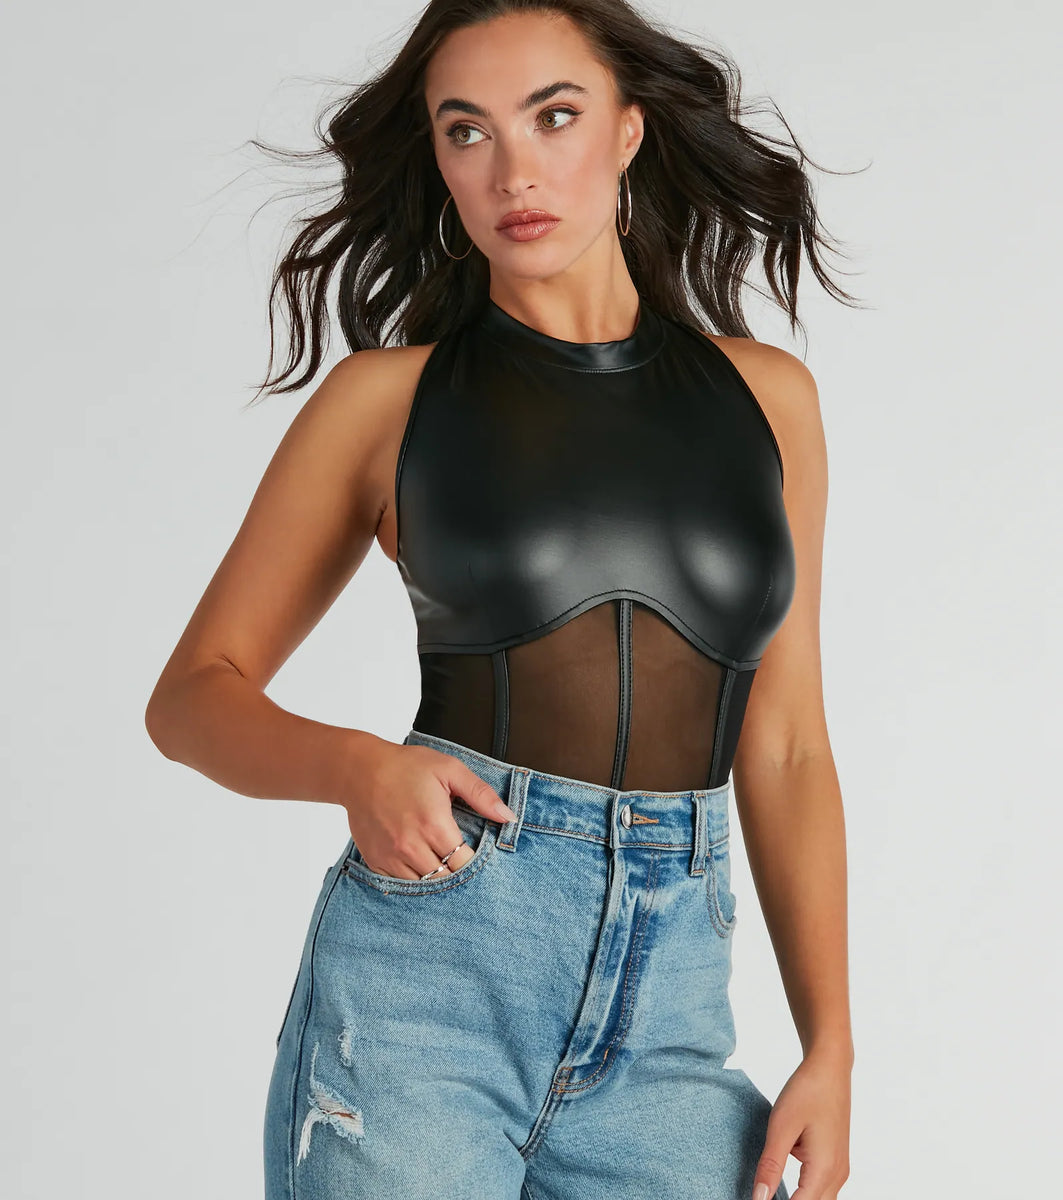 Amped Up Chic Faux Leather Corset Bodysuit